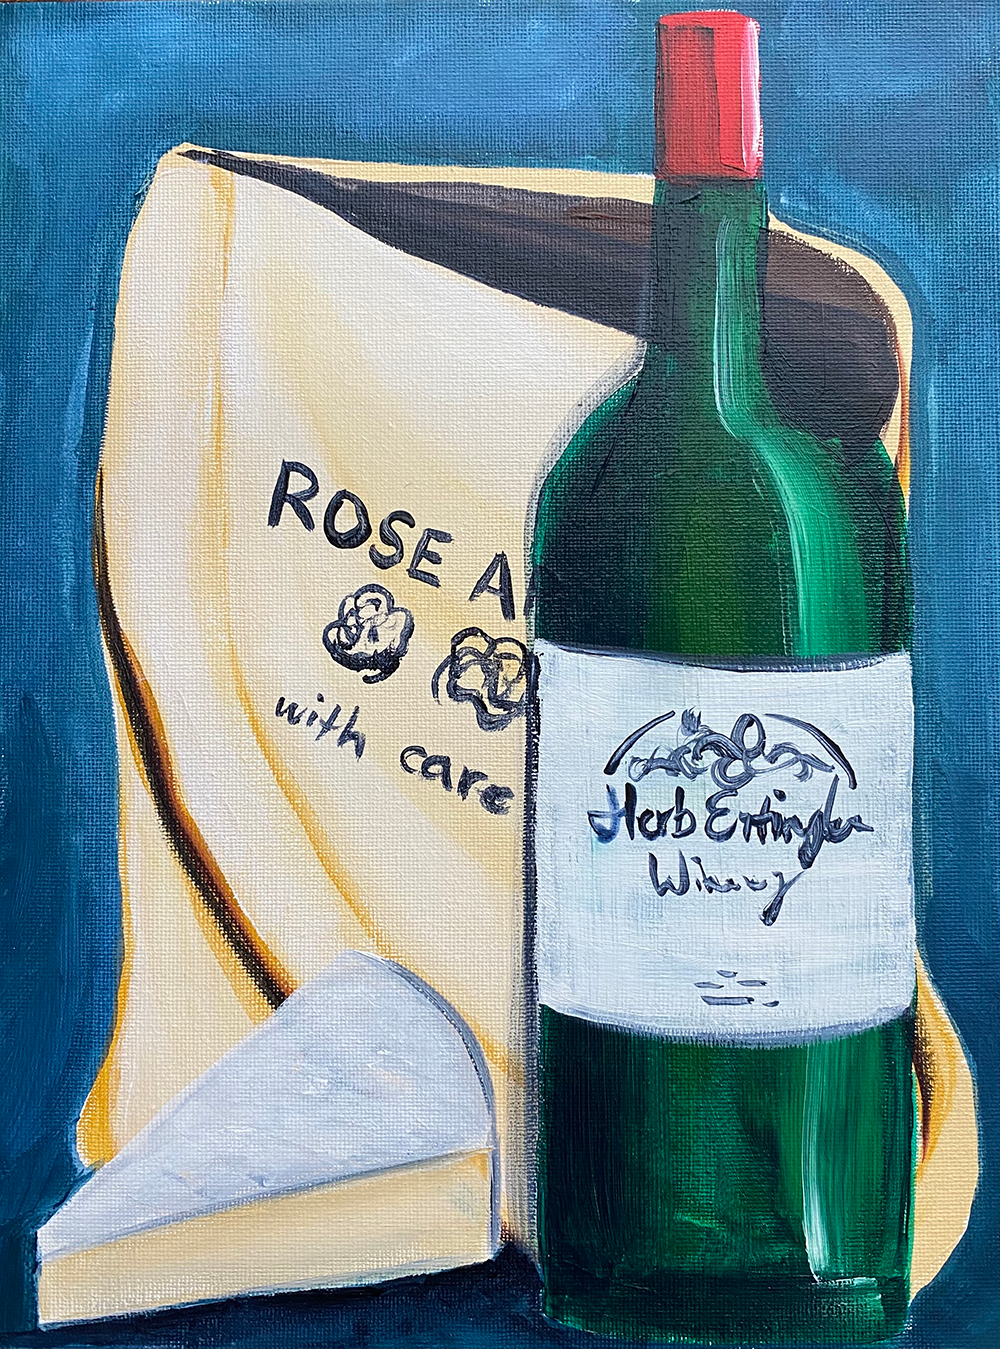 Rose Apothecary Robbery